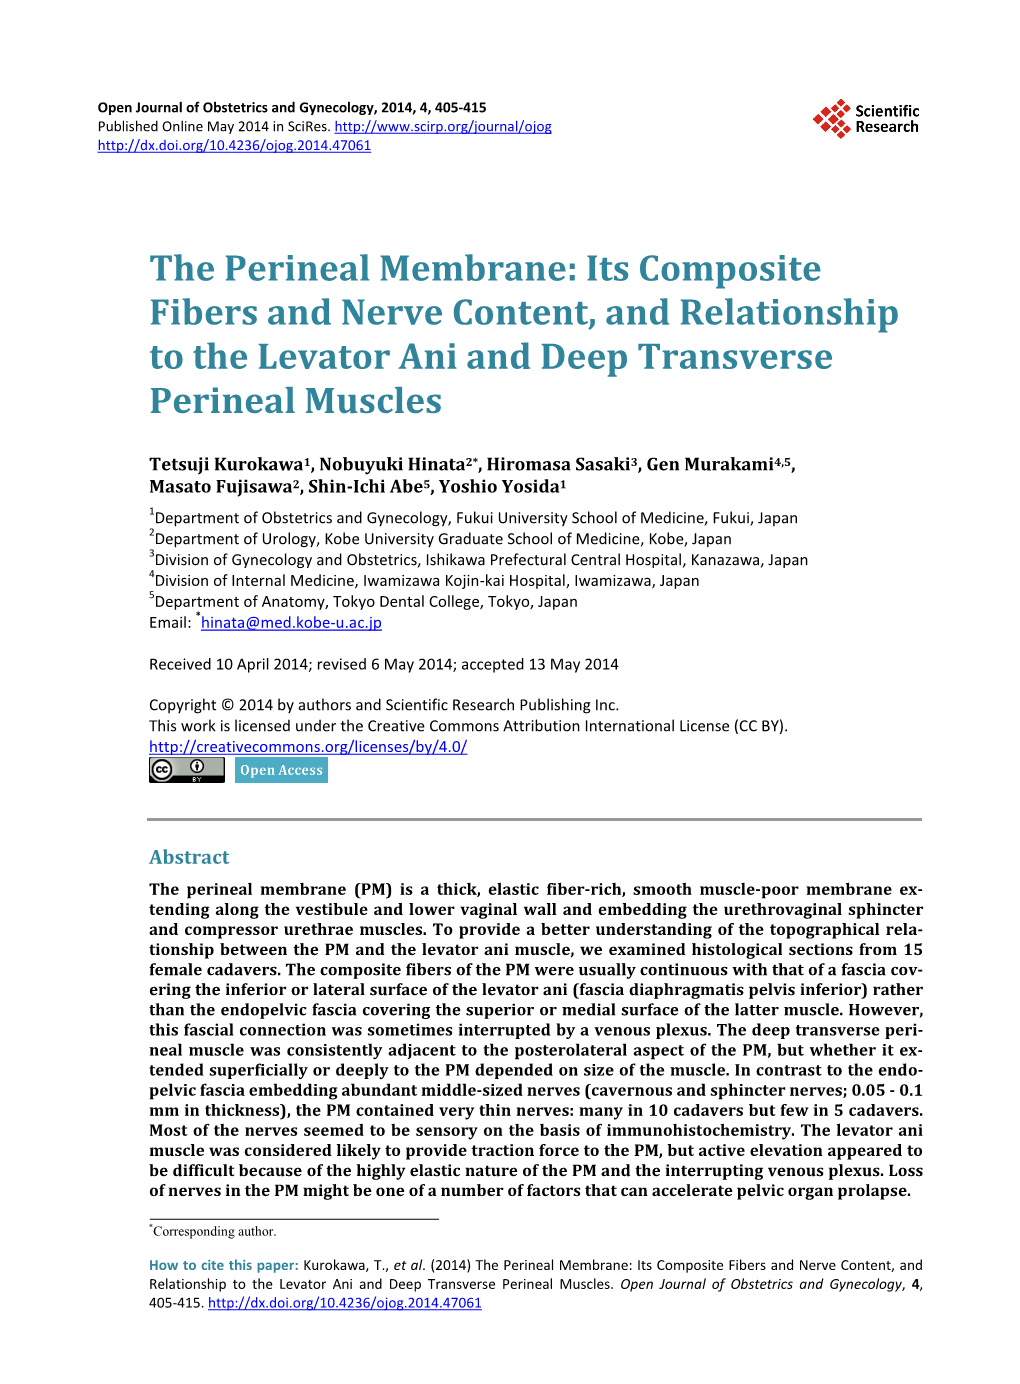 The Perineal Membrane: Its Composite Fibers and Nerve Content, and Relationship to the Levator Ani and Deep Transverse Perineal Muscles